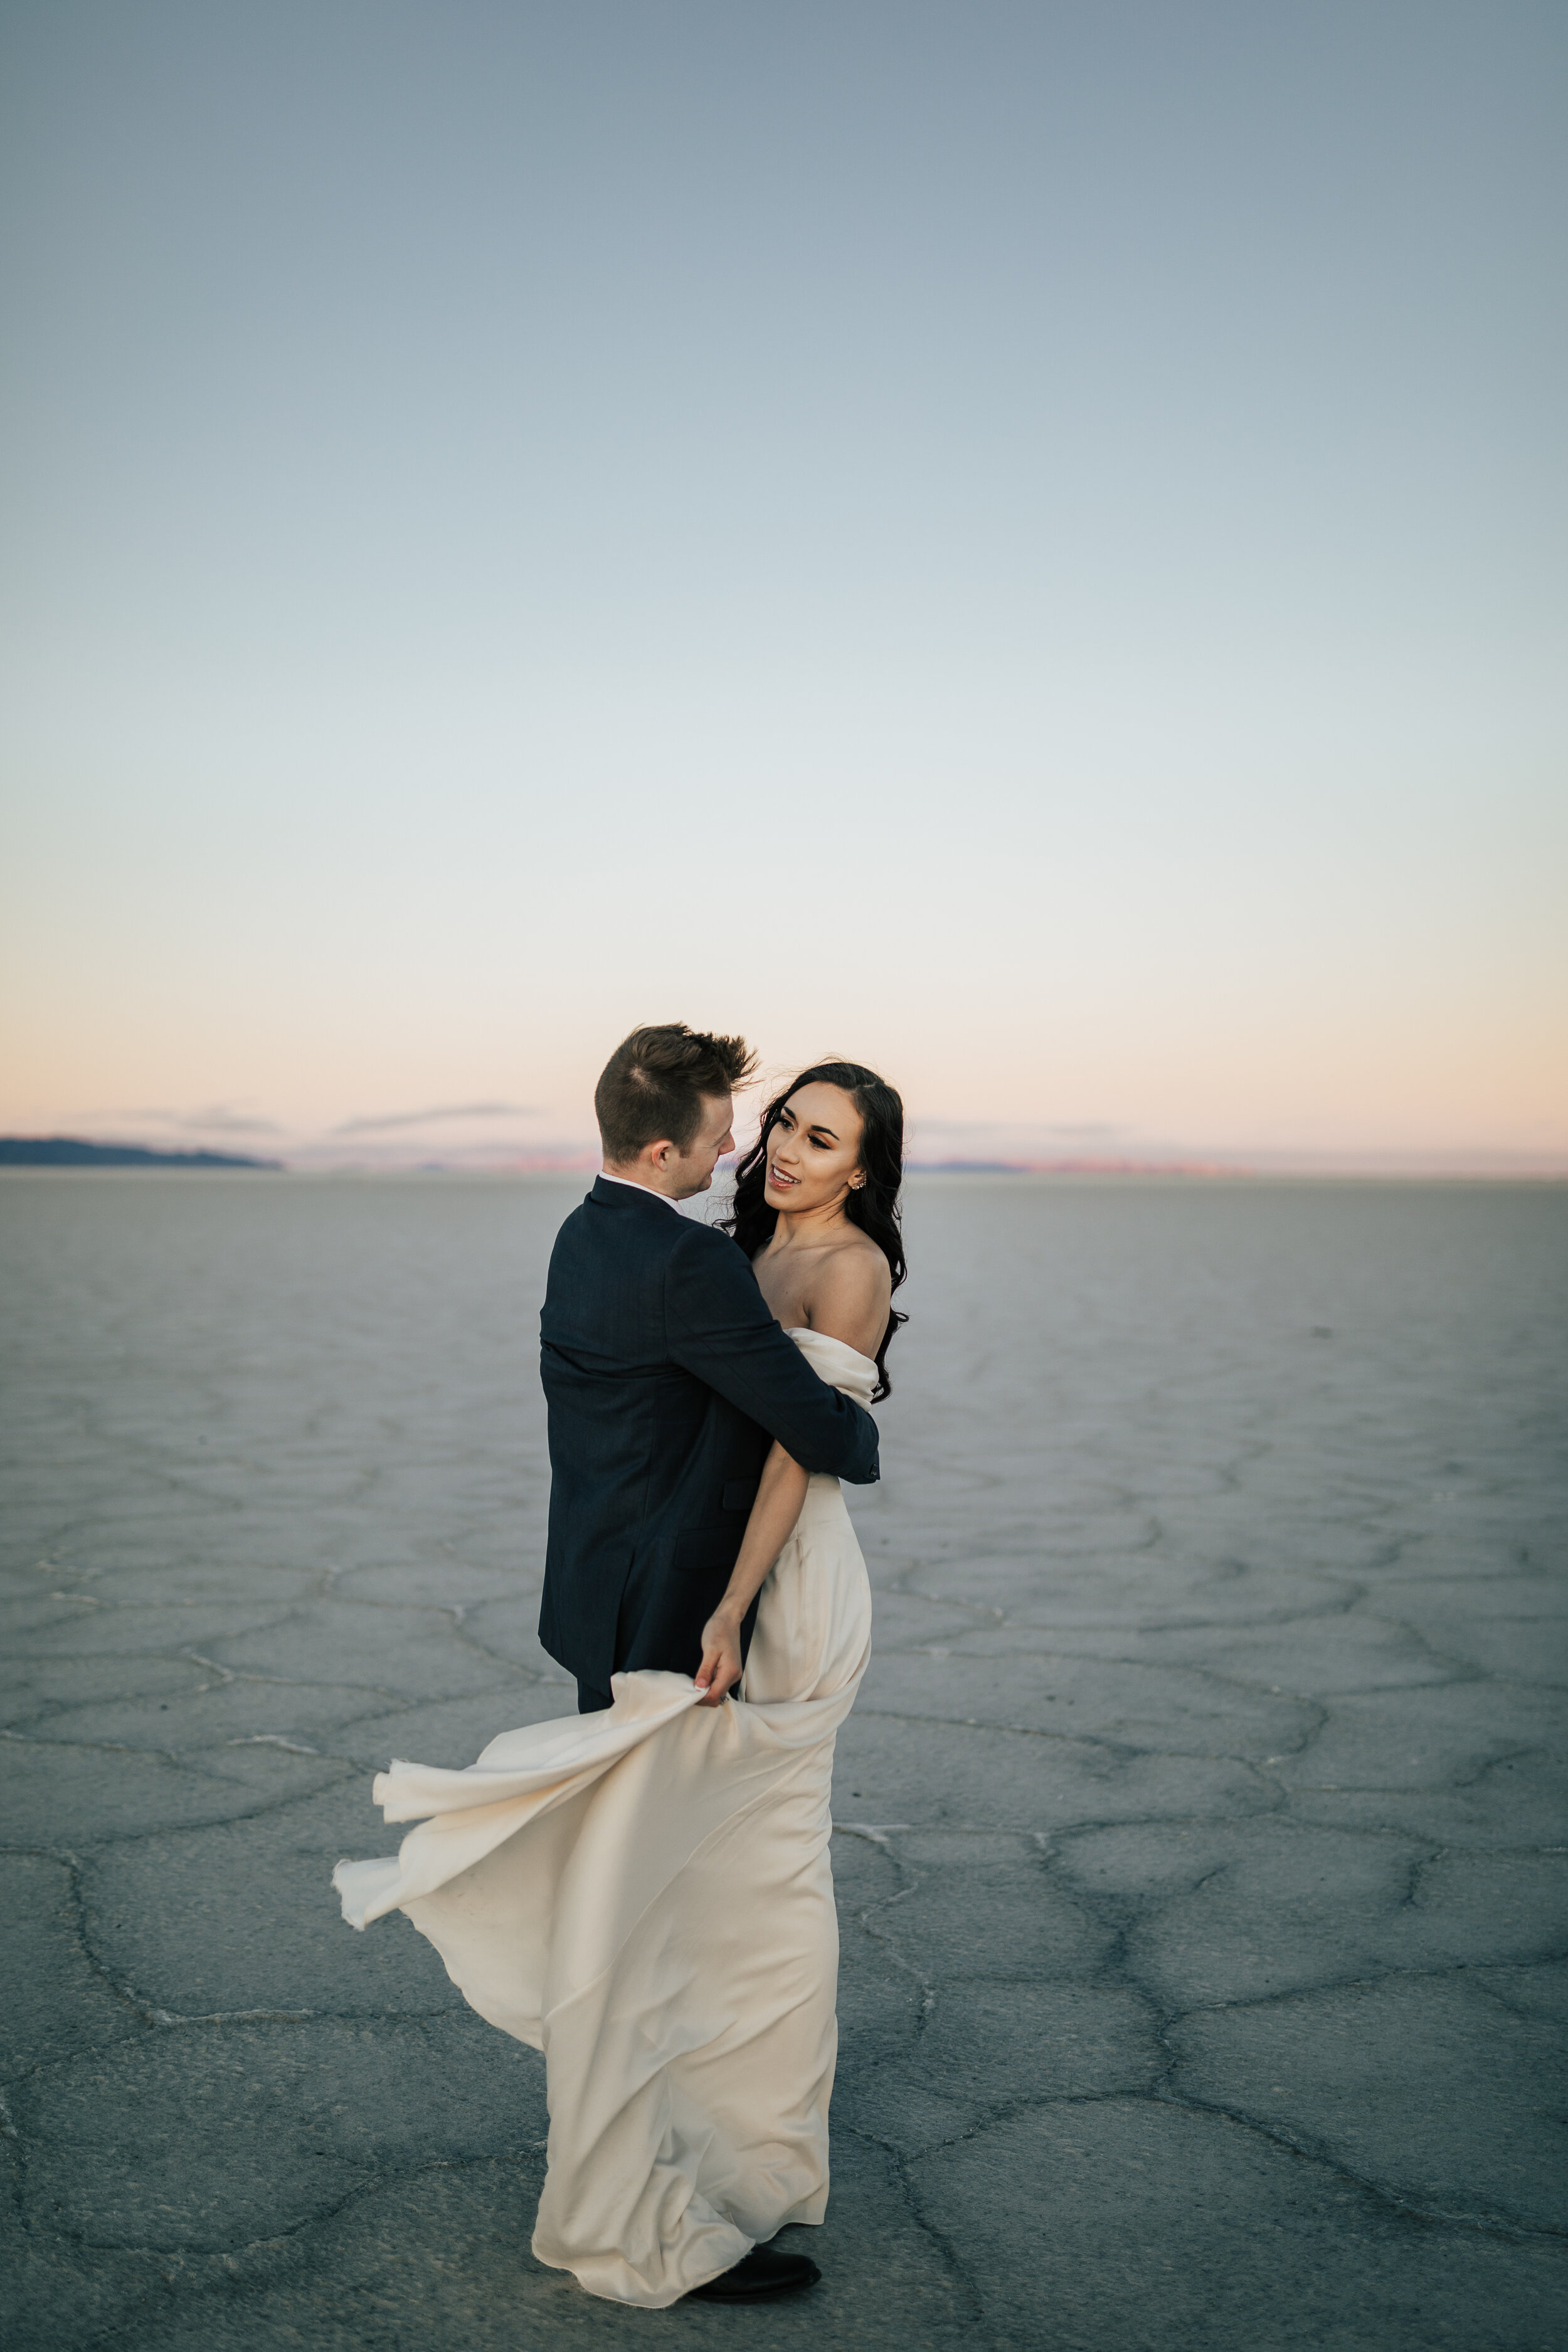  Emily Jenkins Photography photo of a man holding a woman in a beautiful off-the-shoulder cream vow renewal dress in the middle of the Salt Flats in Utah. Wedding redo celebrate anniversary couple photographer Park City photography off the shoulder d